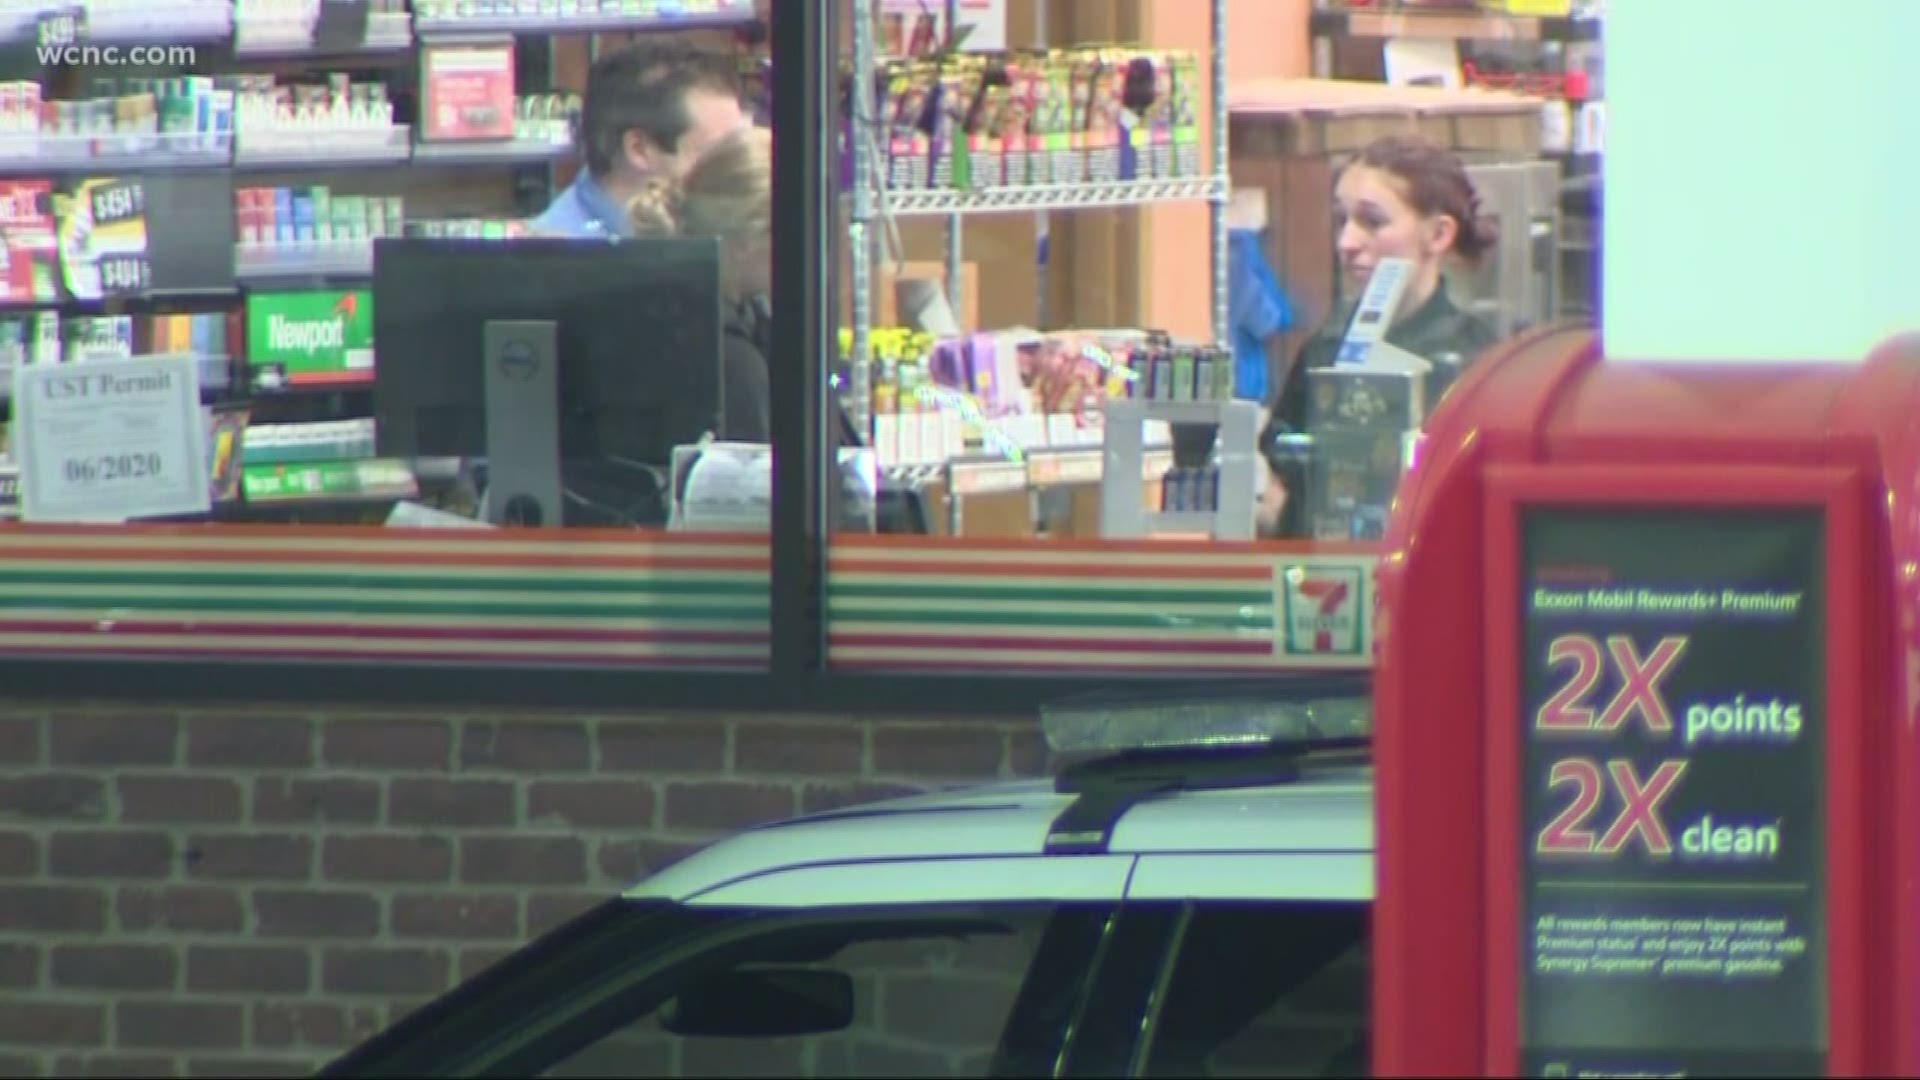 A store manager was shot during an attempted robbery at a 7-Eleven store in southeast Charlotte early Monday morning. 

Charlotte-Mecklenburg Police was called to the 7-Eleven at the corner of Monroe Road and Sharon Amity Road just after 3 a.m. 

According to police, a suspect entered the store and shot the store manager during an attempted robbery. Police said the store manager returned fire, injuring the suspect. Police said the suspect fled the scene but was later located by police at 5340 Mo